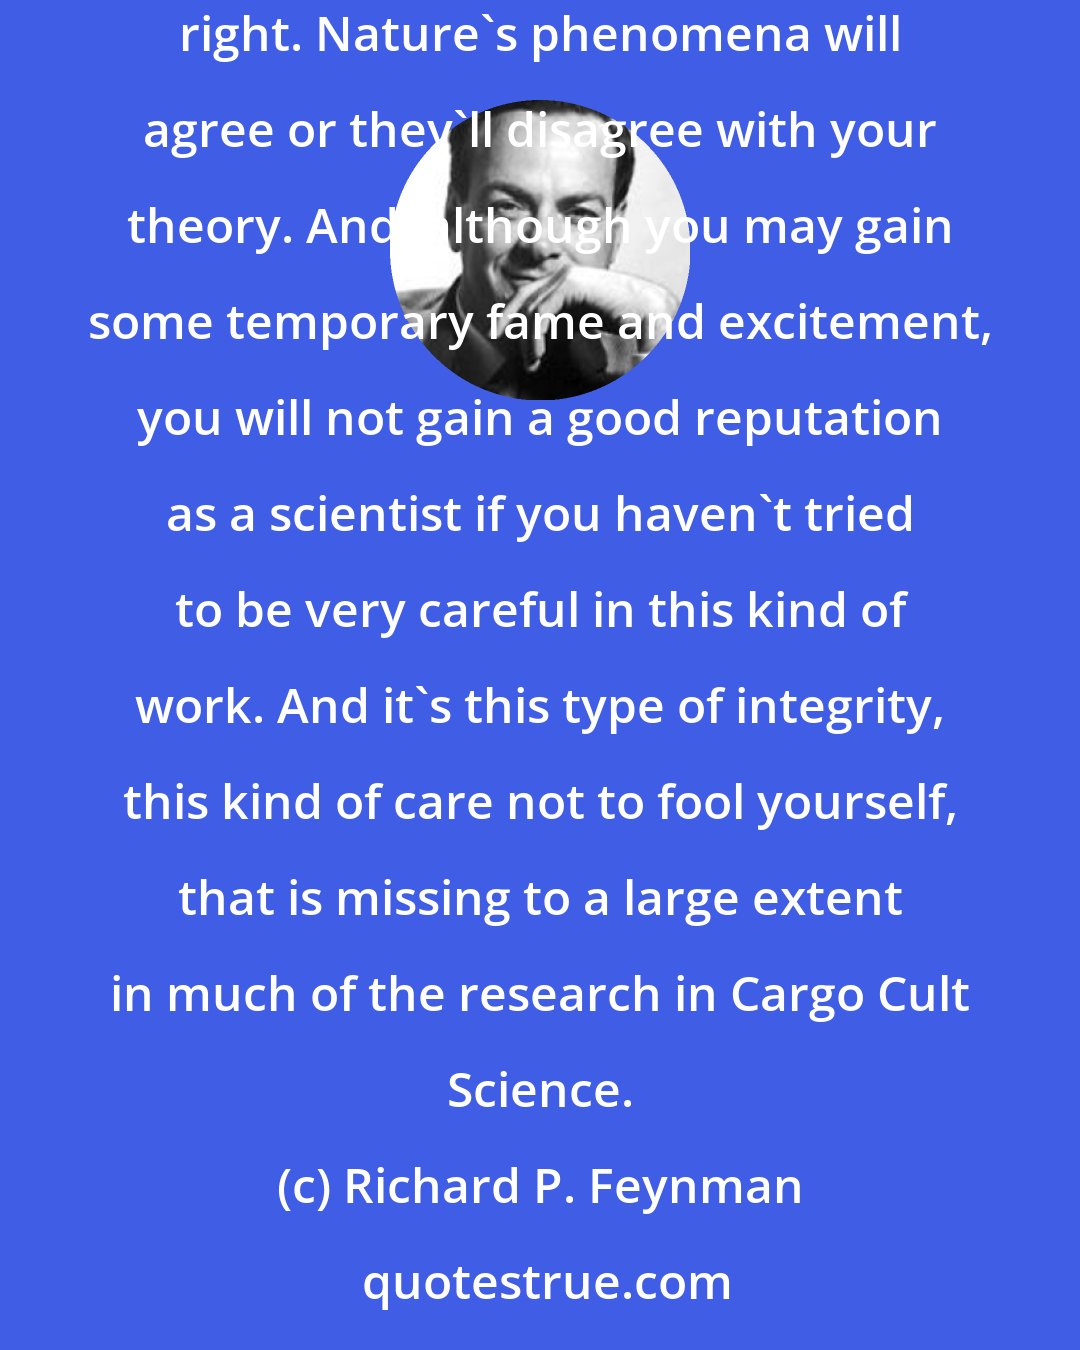 Richard P. Feynman: We've learned from experience that the truth will out. Other experimenters will repeat your experiment and find out whether you were wrong or right. Nature's phenomena will agree or they'll disagree with your theory. And, although you may gain some temporary fame and excitement, you will not gain a good reputation as a scientist if you haven't tried to be very careful in this kind of work. And it's this type of integrity, this kind of care not to fool yourself, that is missing to a large extent in much of the research in Cargo Cult Science.